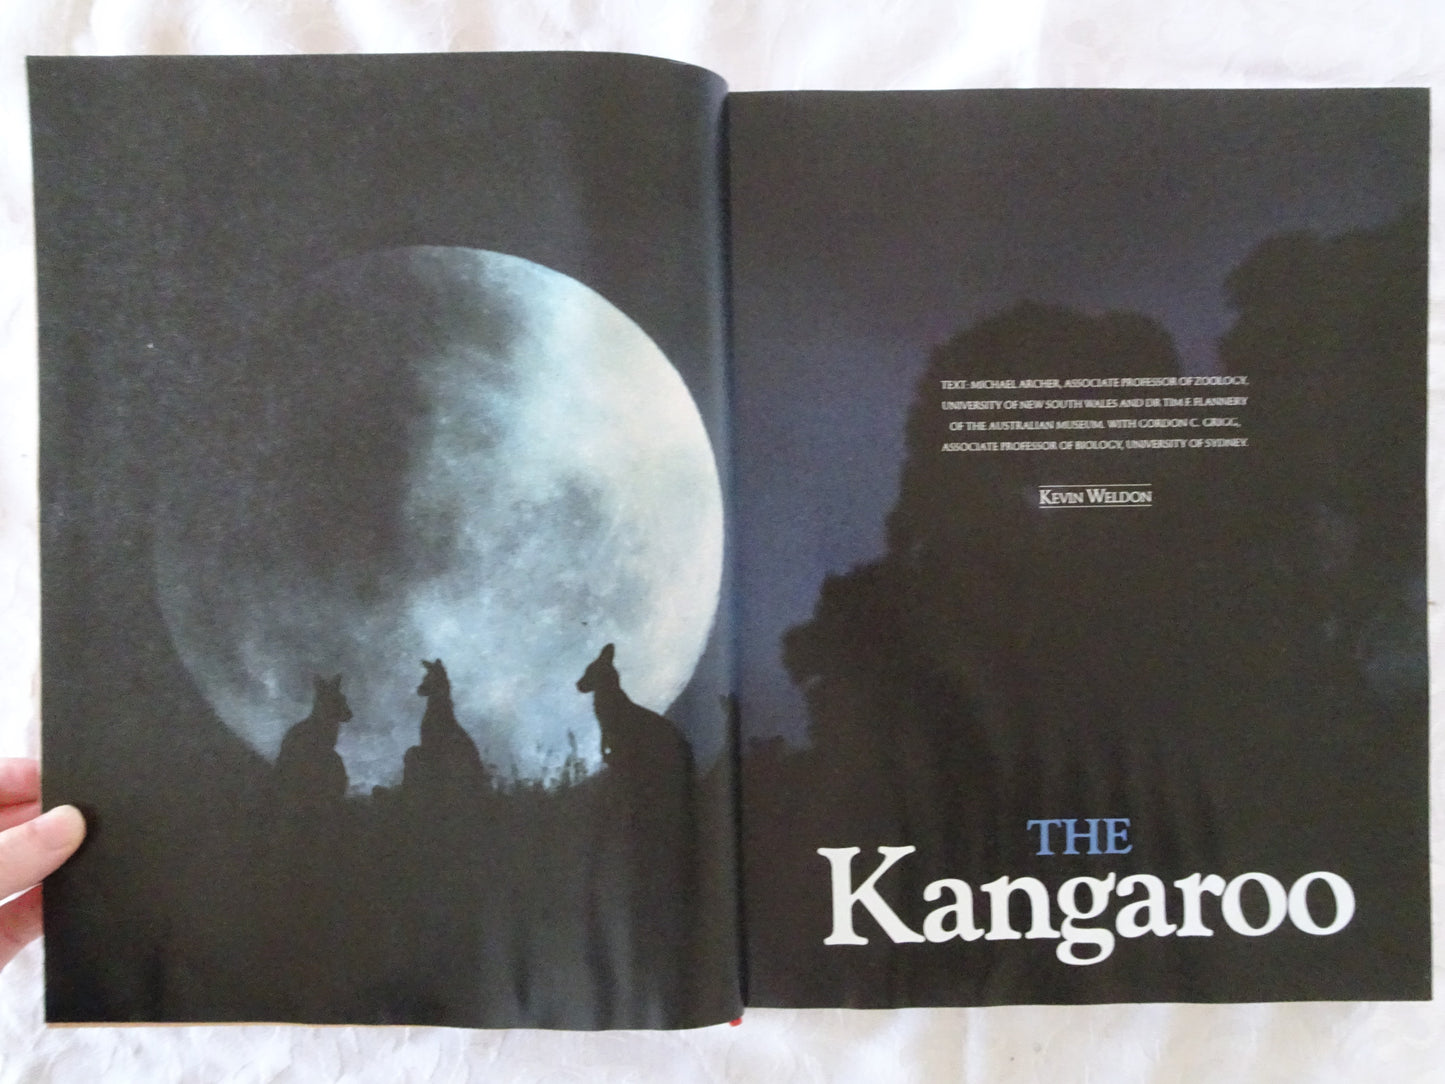 The Kangaroo by Michael Archer, Tim F. Flannery and Gorden C. Grigg